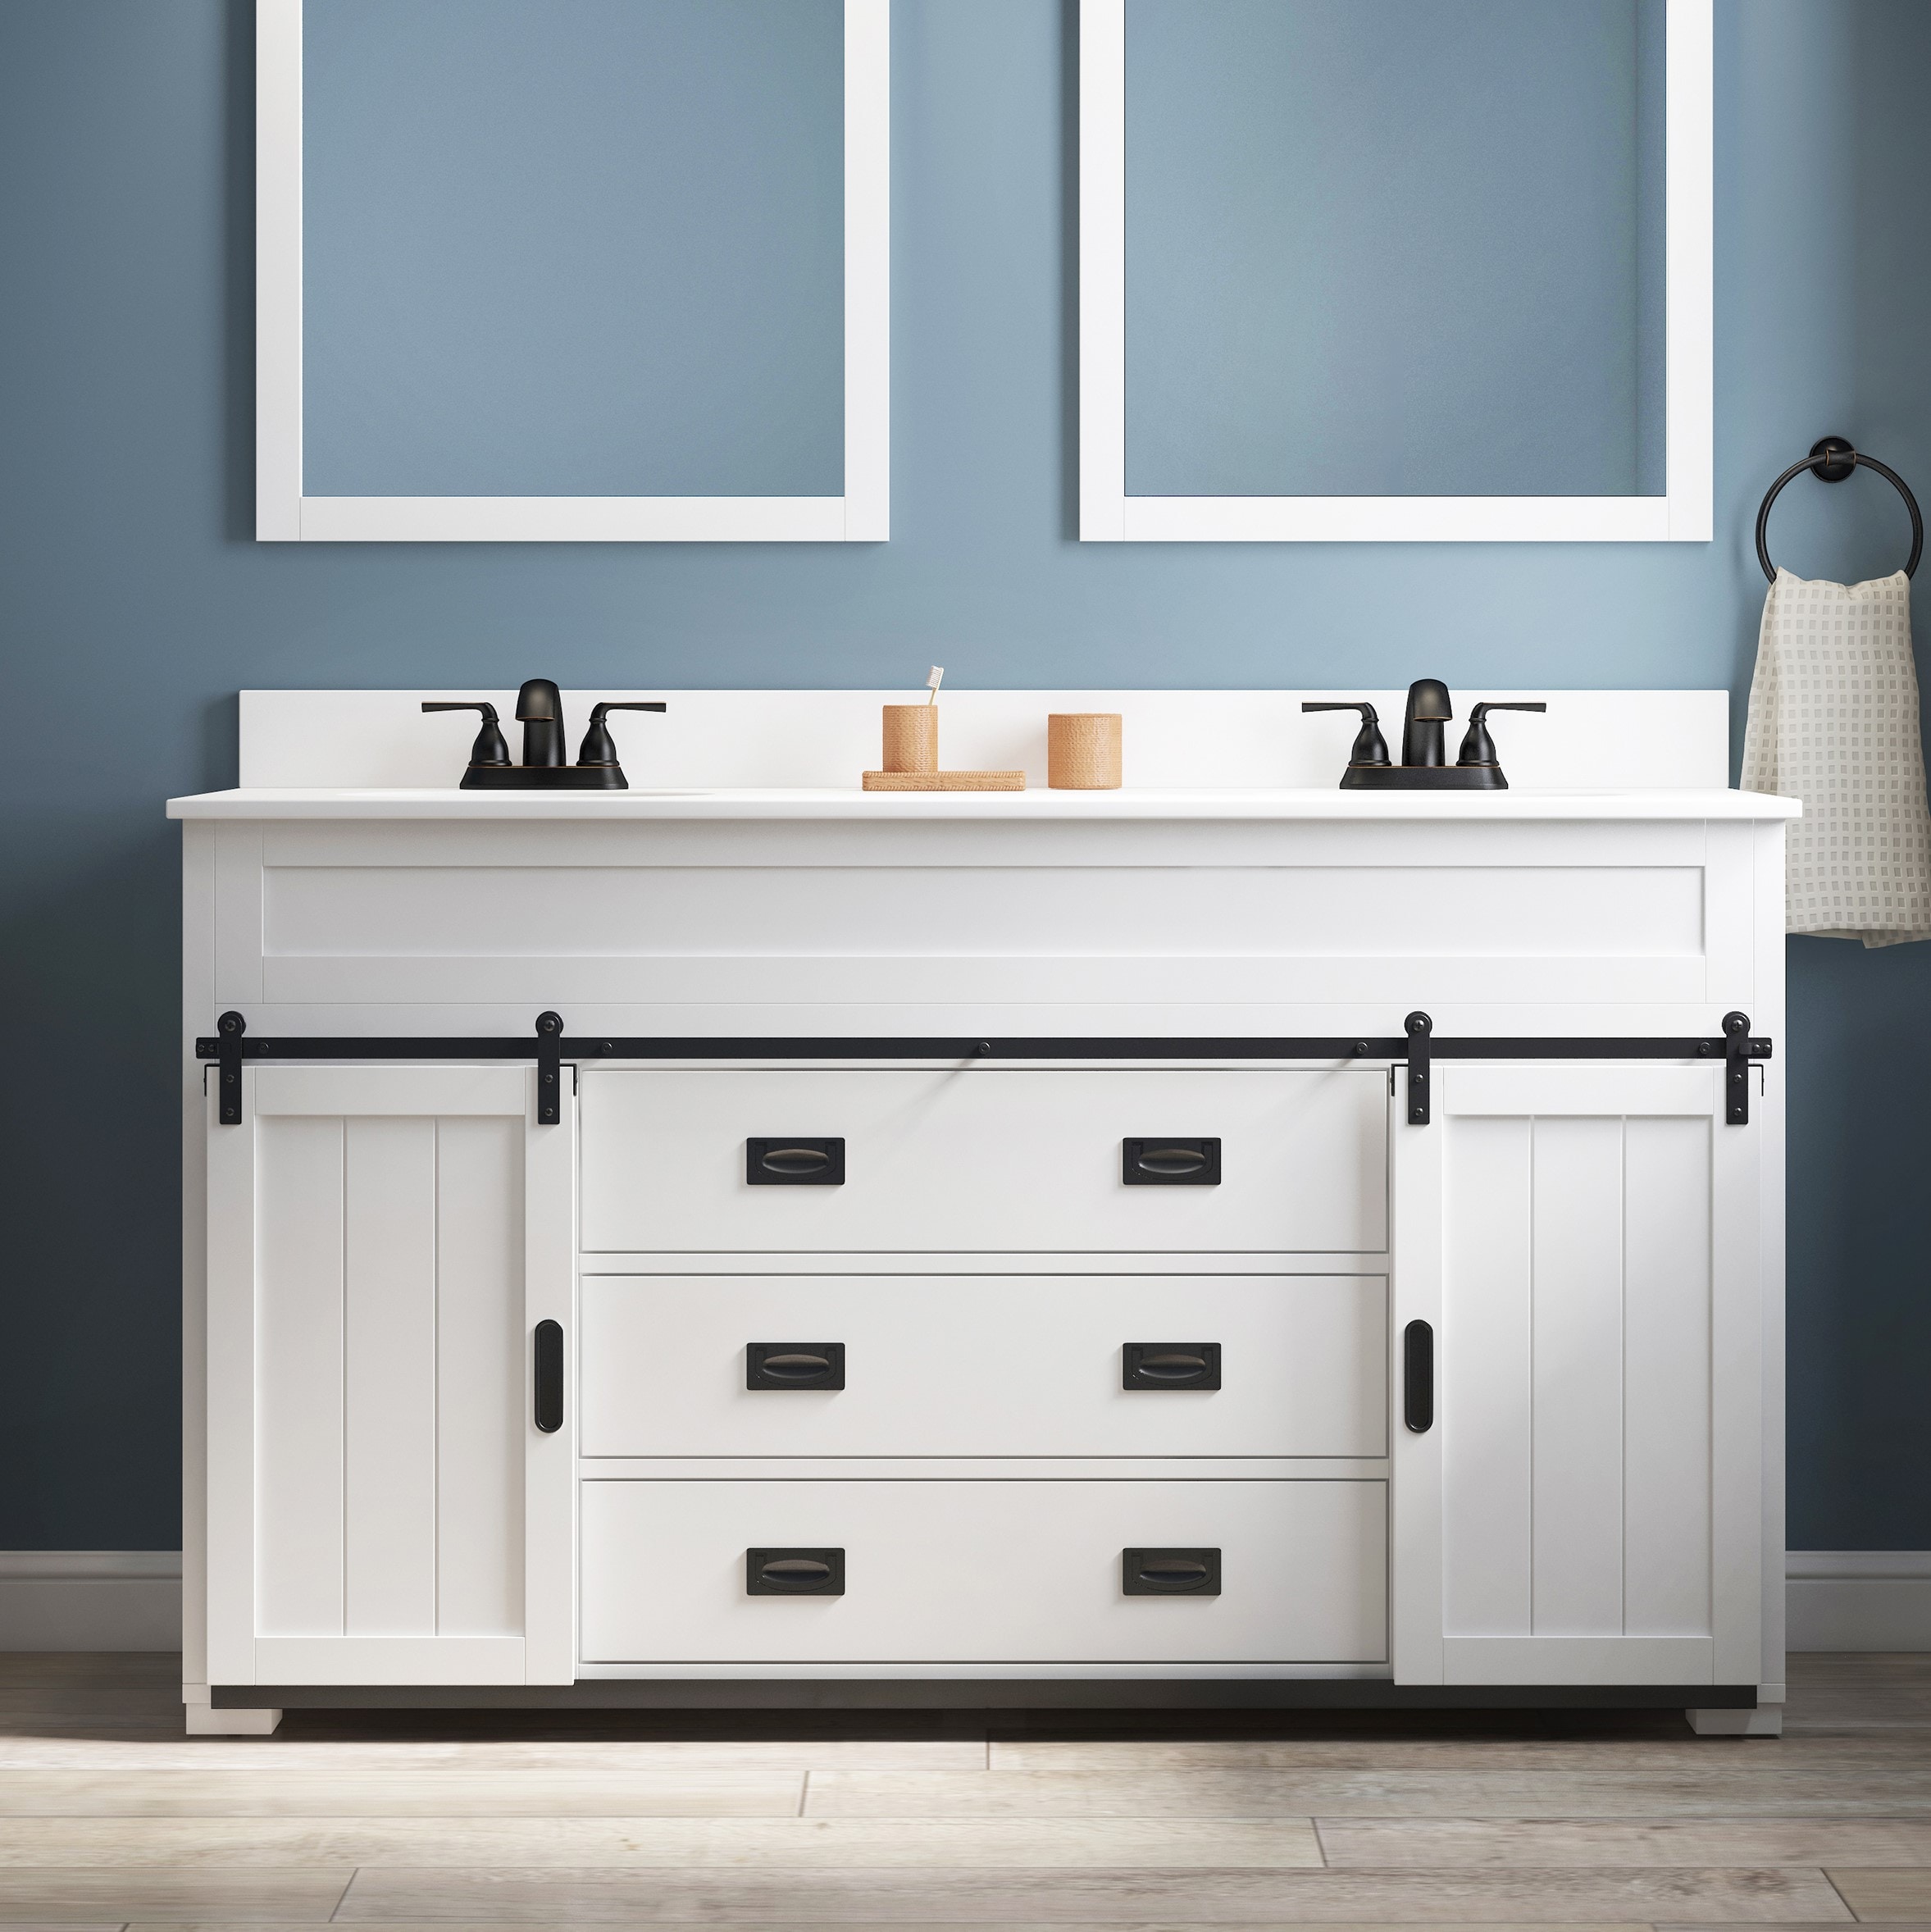 Best Double Sink Vanity with Makeup Table: Top Picks for Your